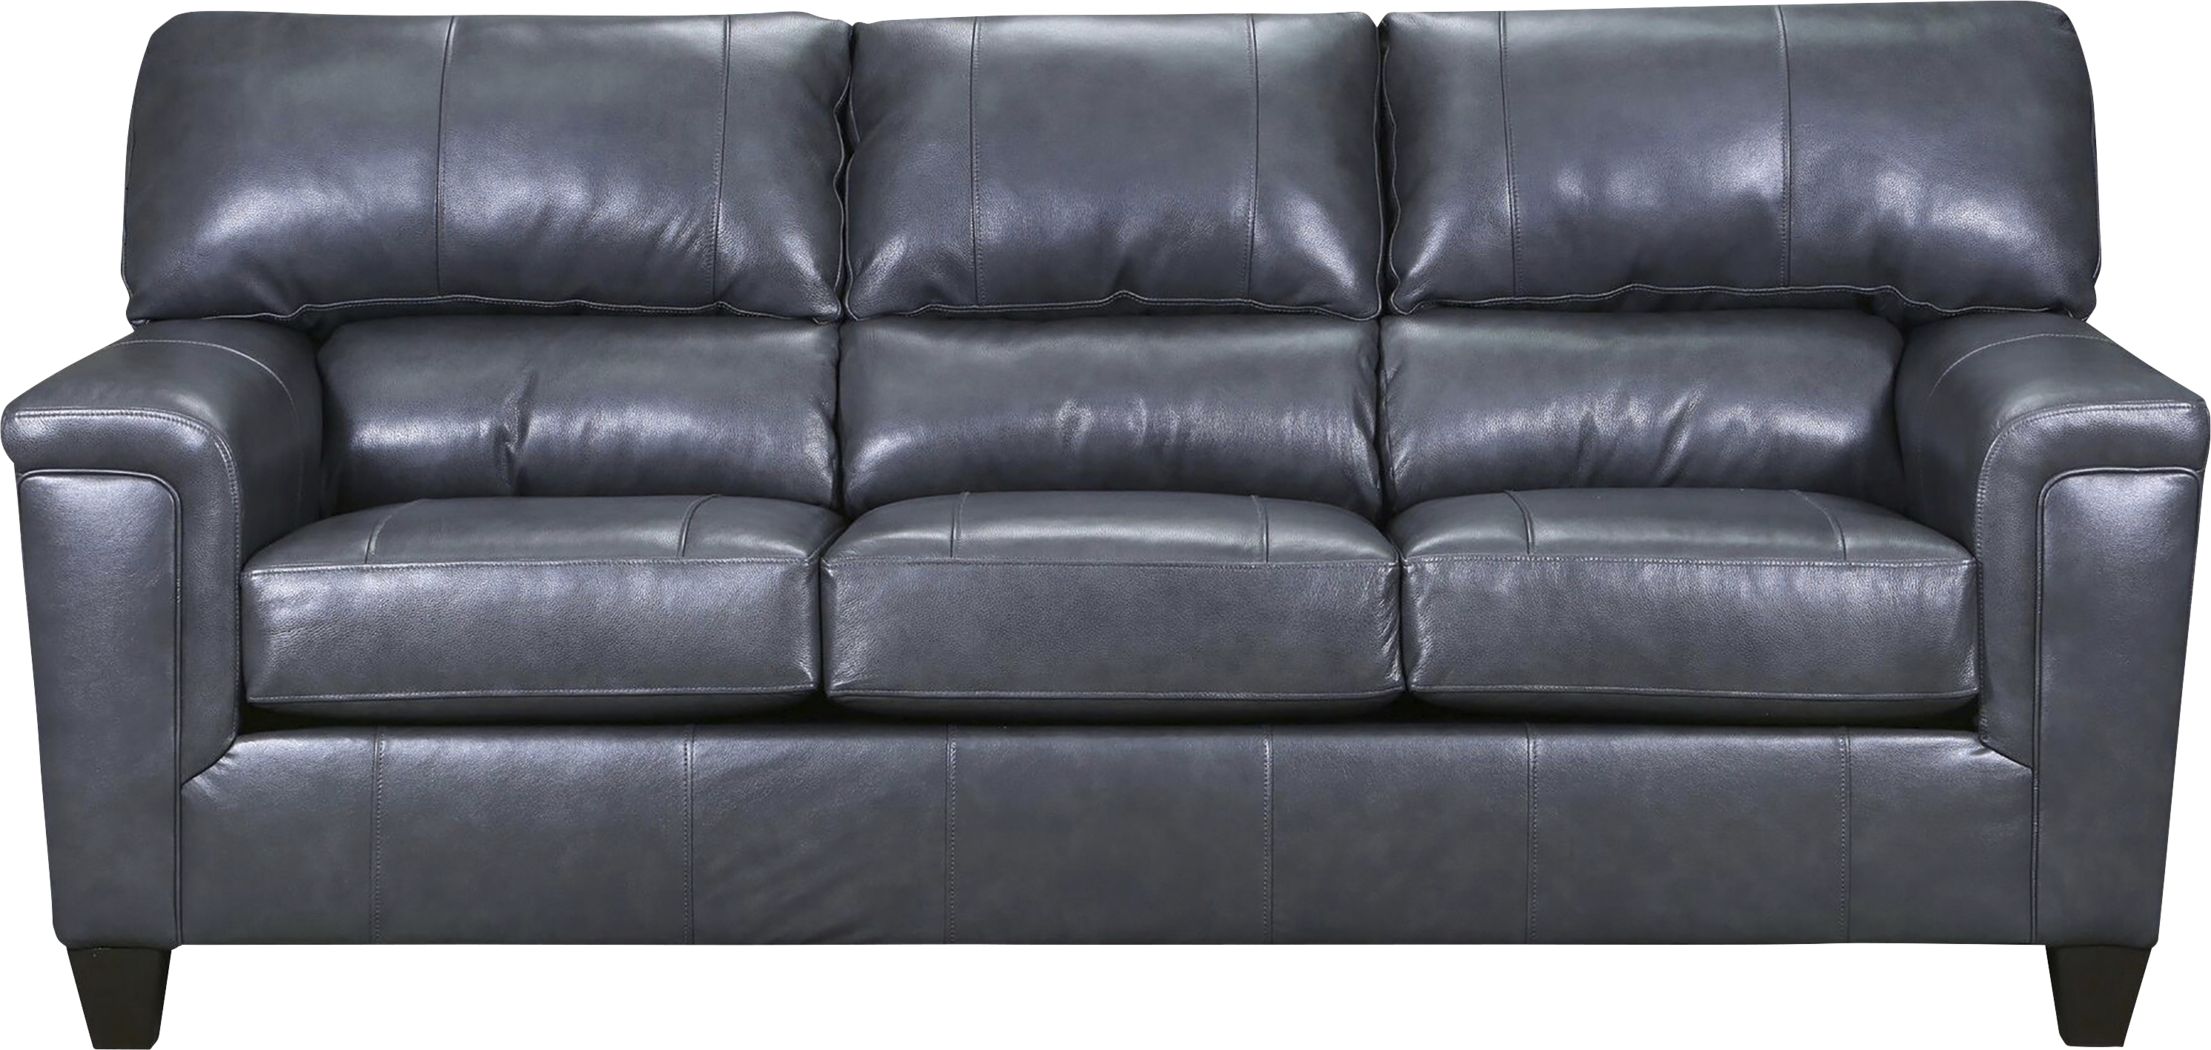 Leather Living Room Furniture, Leather Furniture Houston Tx